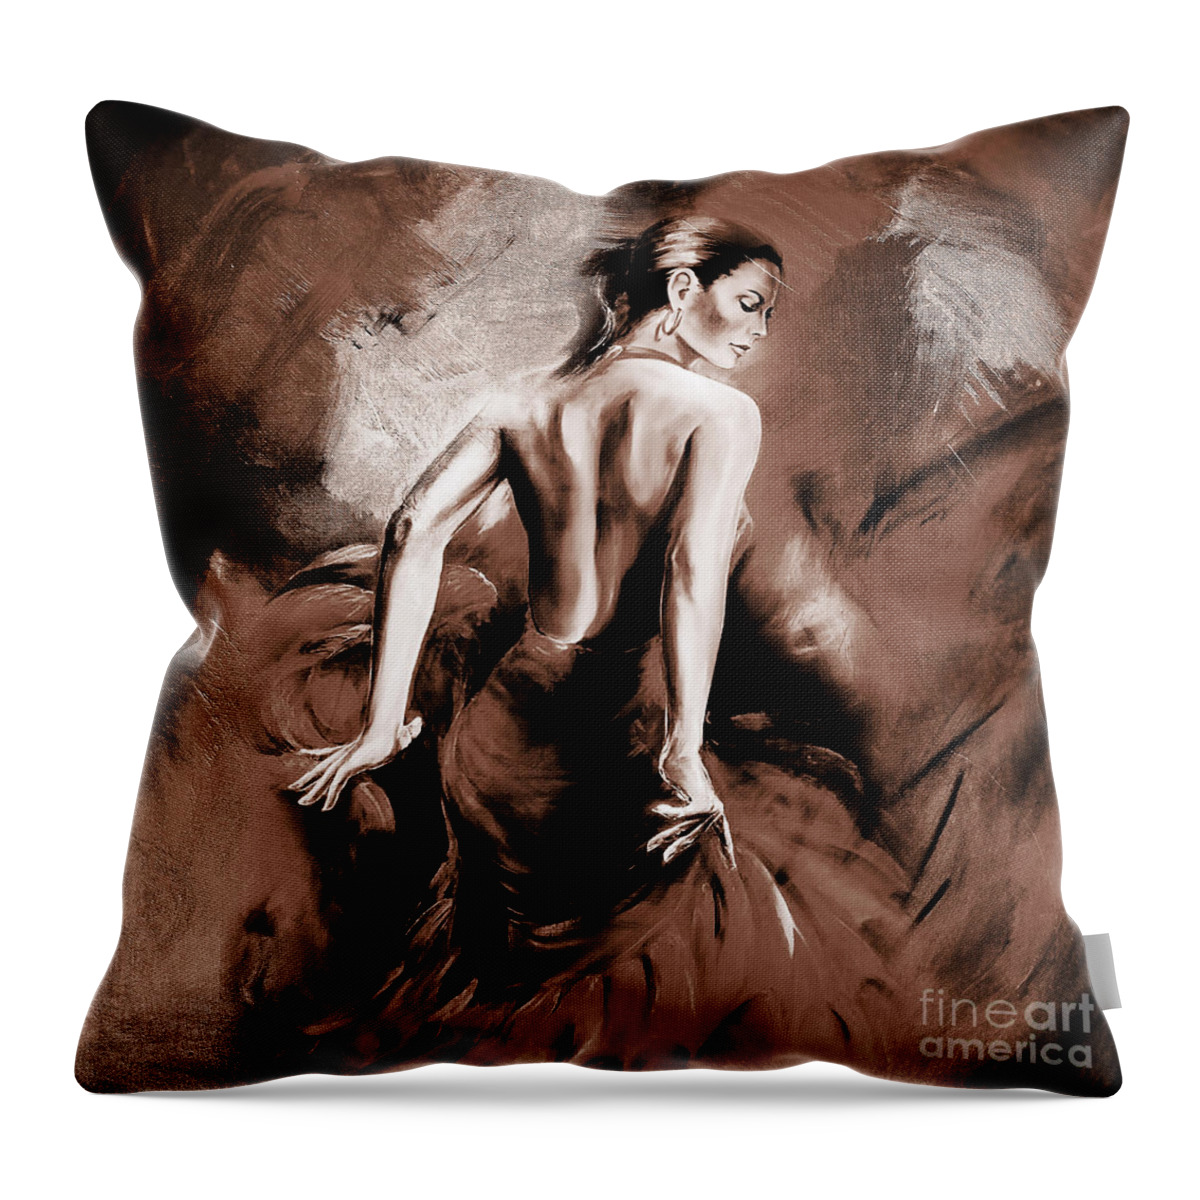 Dance Throw Pillow featuring the painting Figurative art 007b by Gull G